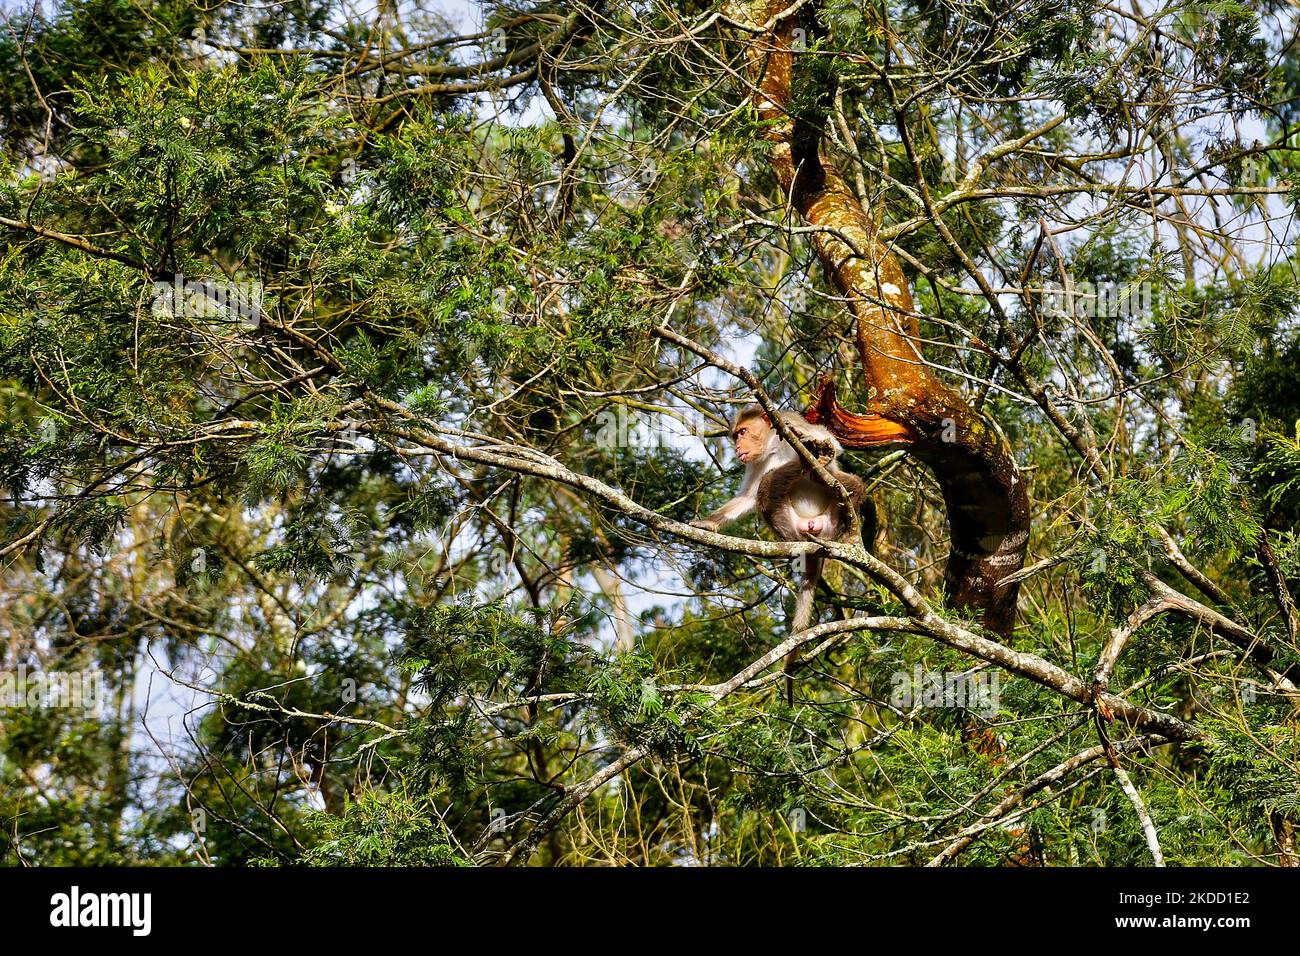 Rhesus monkey (Macaca mulatta) in a tree in the forest leading to the Guna Caves (Devils Kitchen) in Kodaikanal, Tamil Nadu, India, on May 16, 2022. Guna Caves is a series of caves and caverns as well as a sightseeing place which is famous for its 3 Pillar-type Rocks. Devils Kitchen is the original name of this place, but following the Blockbuster Kamal Hassan movie titled Guna (which was filmed in these caves), they are now known as the Guna Caves by Indian tourists. 13 people have died while trying to enter the Caves. (Photo by Creative Touch Imaging Ltd./NurPhoto) Stock Photo